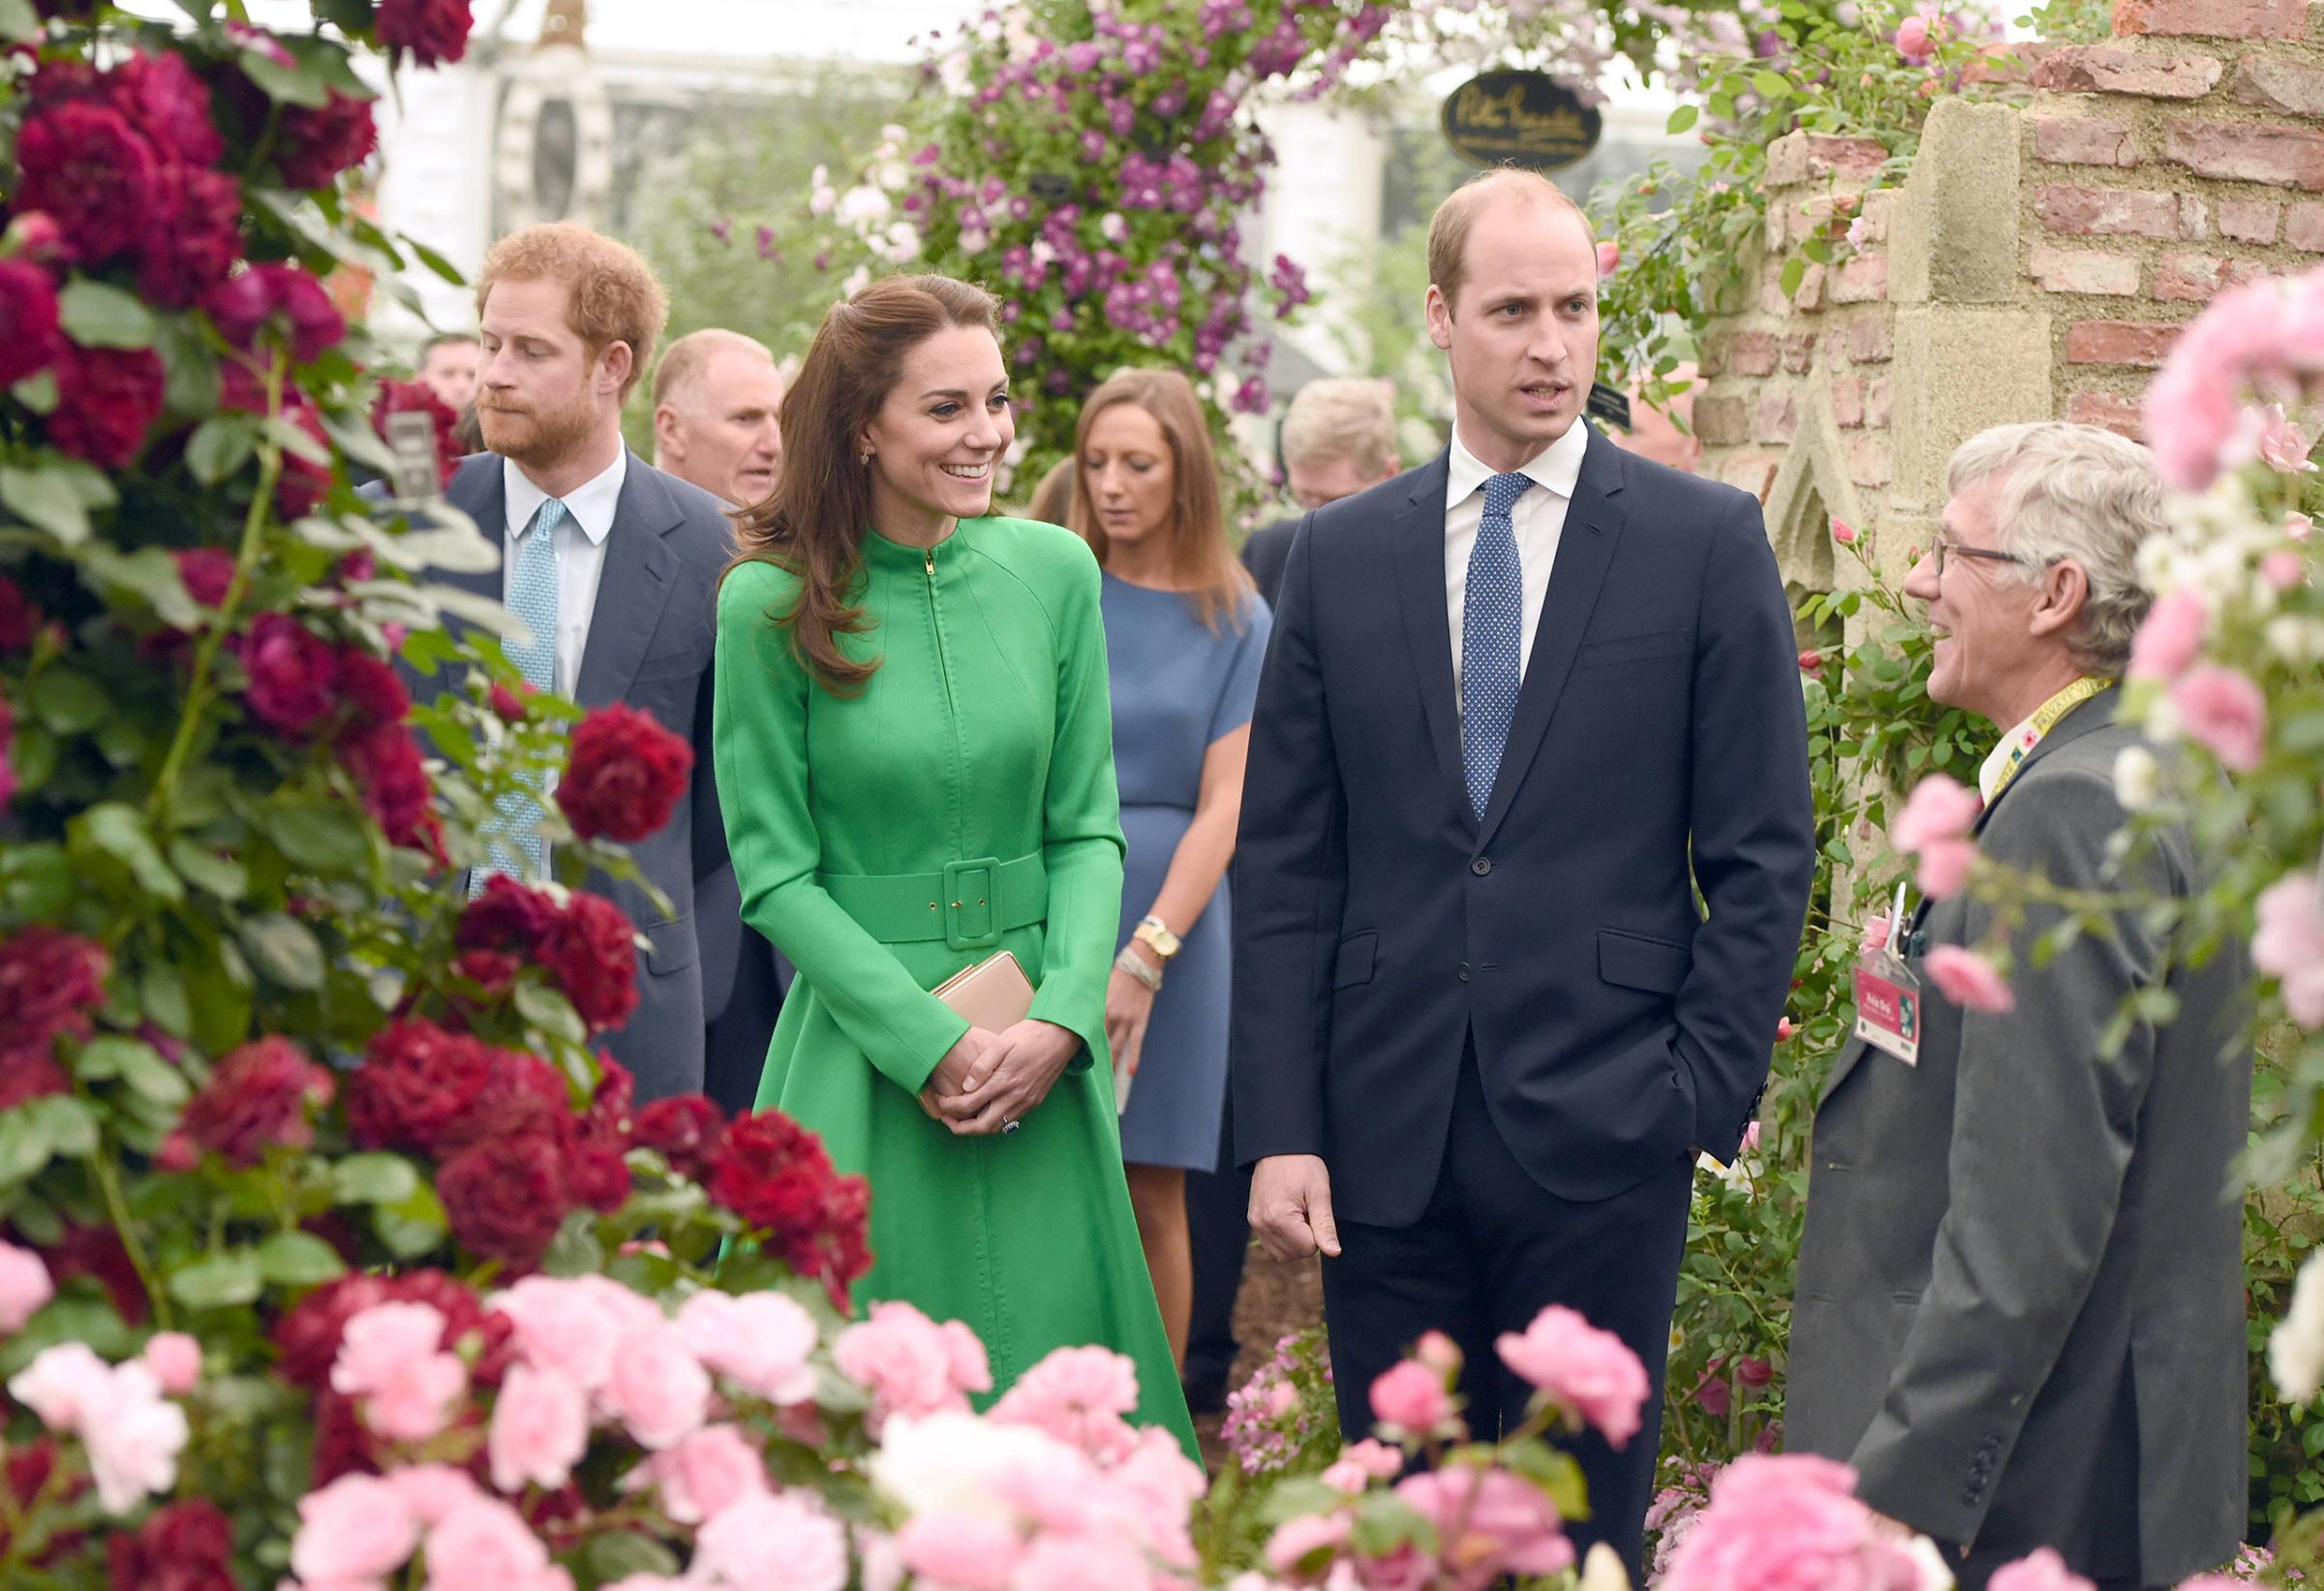 Prince William and Catherine, Duchess of Cambridge, are joined by Prince Harry during a visit to the 2016 Chelsea Flower Show in London on May 23, 2016.